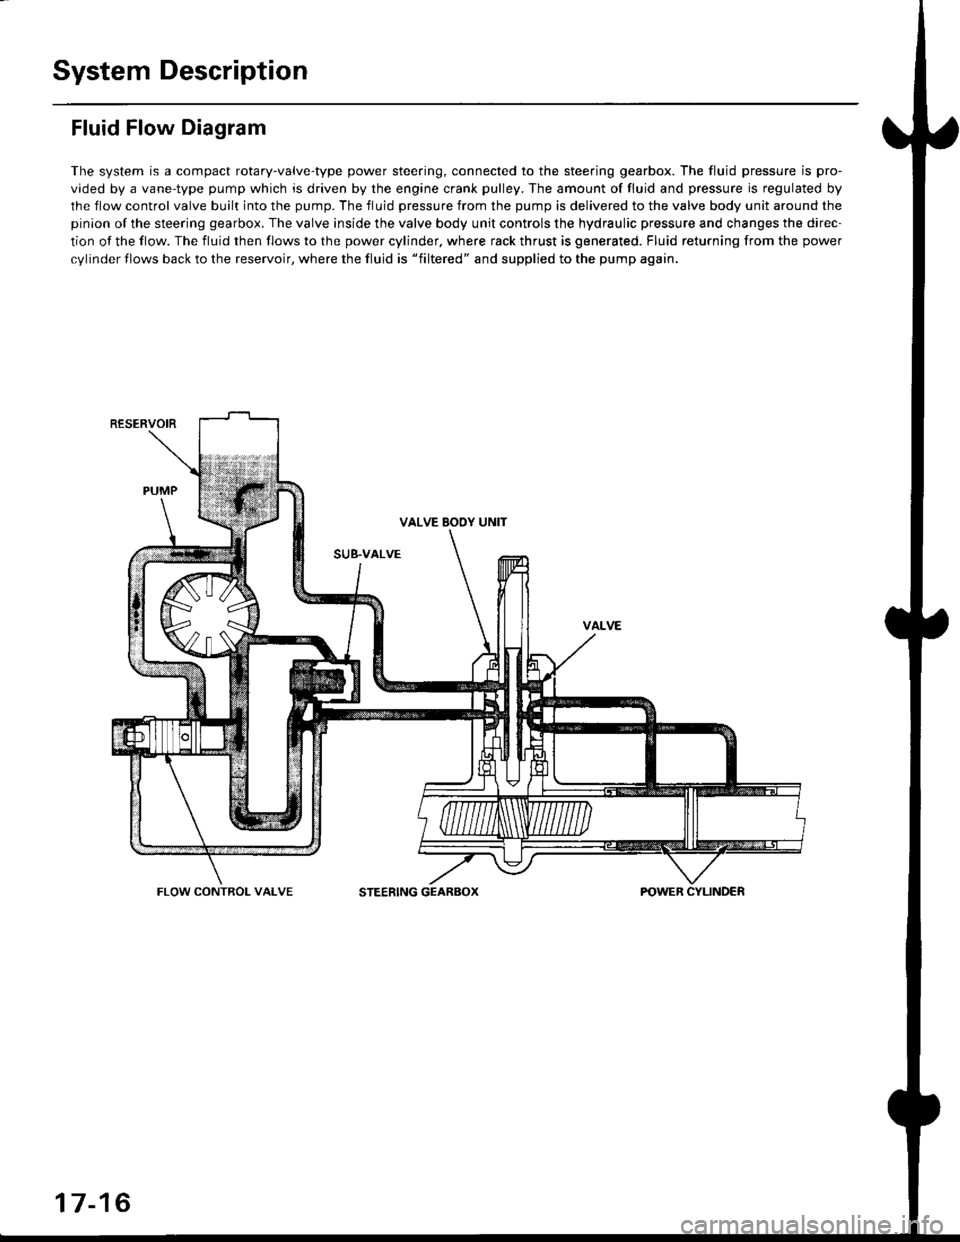 HONDA CIVIC 1998 6.G User Guide System Description
Fluid Flow Diagram
The system is a compact rotary-valve-type power steering, connected to the steering gearbox. The fluid pressure is pro-
vided by a vane-type pump which is driven 